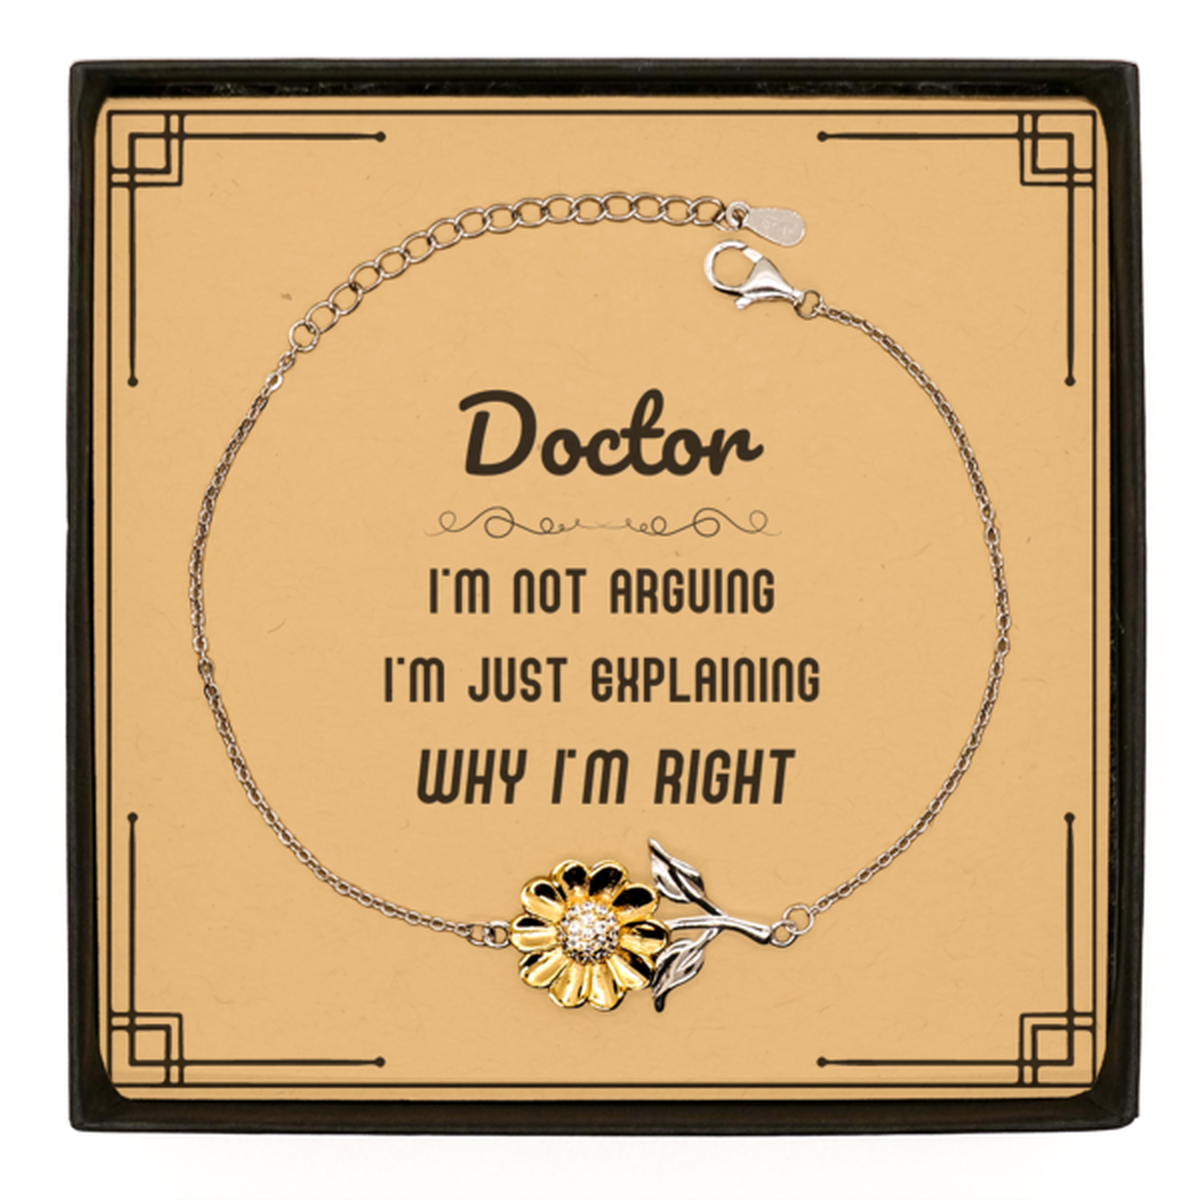 Doctor I'm not Arguing. I'm Just Explaining Why I'm RIGHT Sunflower Bracelet, Funny Saying Quote Doctor Gifts For Doctor Message Card Graduation Birthday Christmas Gifts for Men Women Coworker